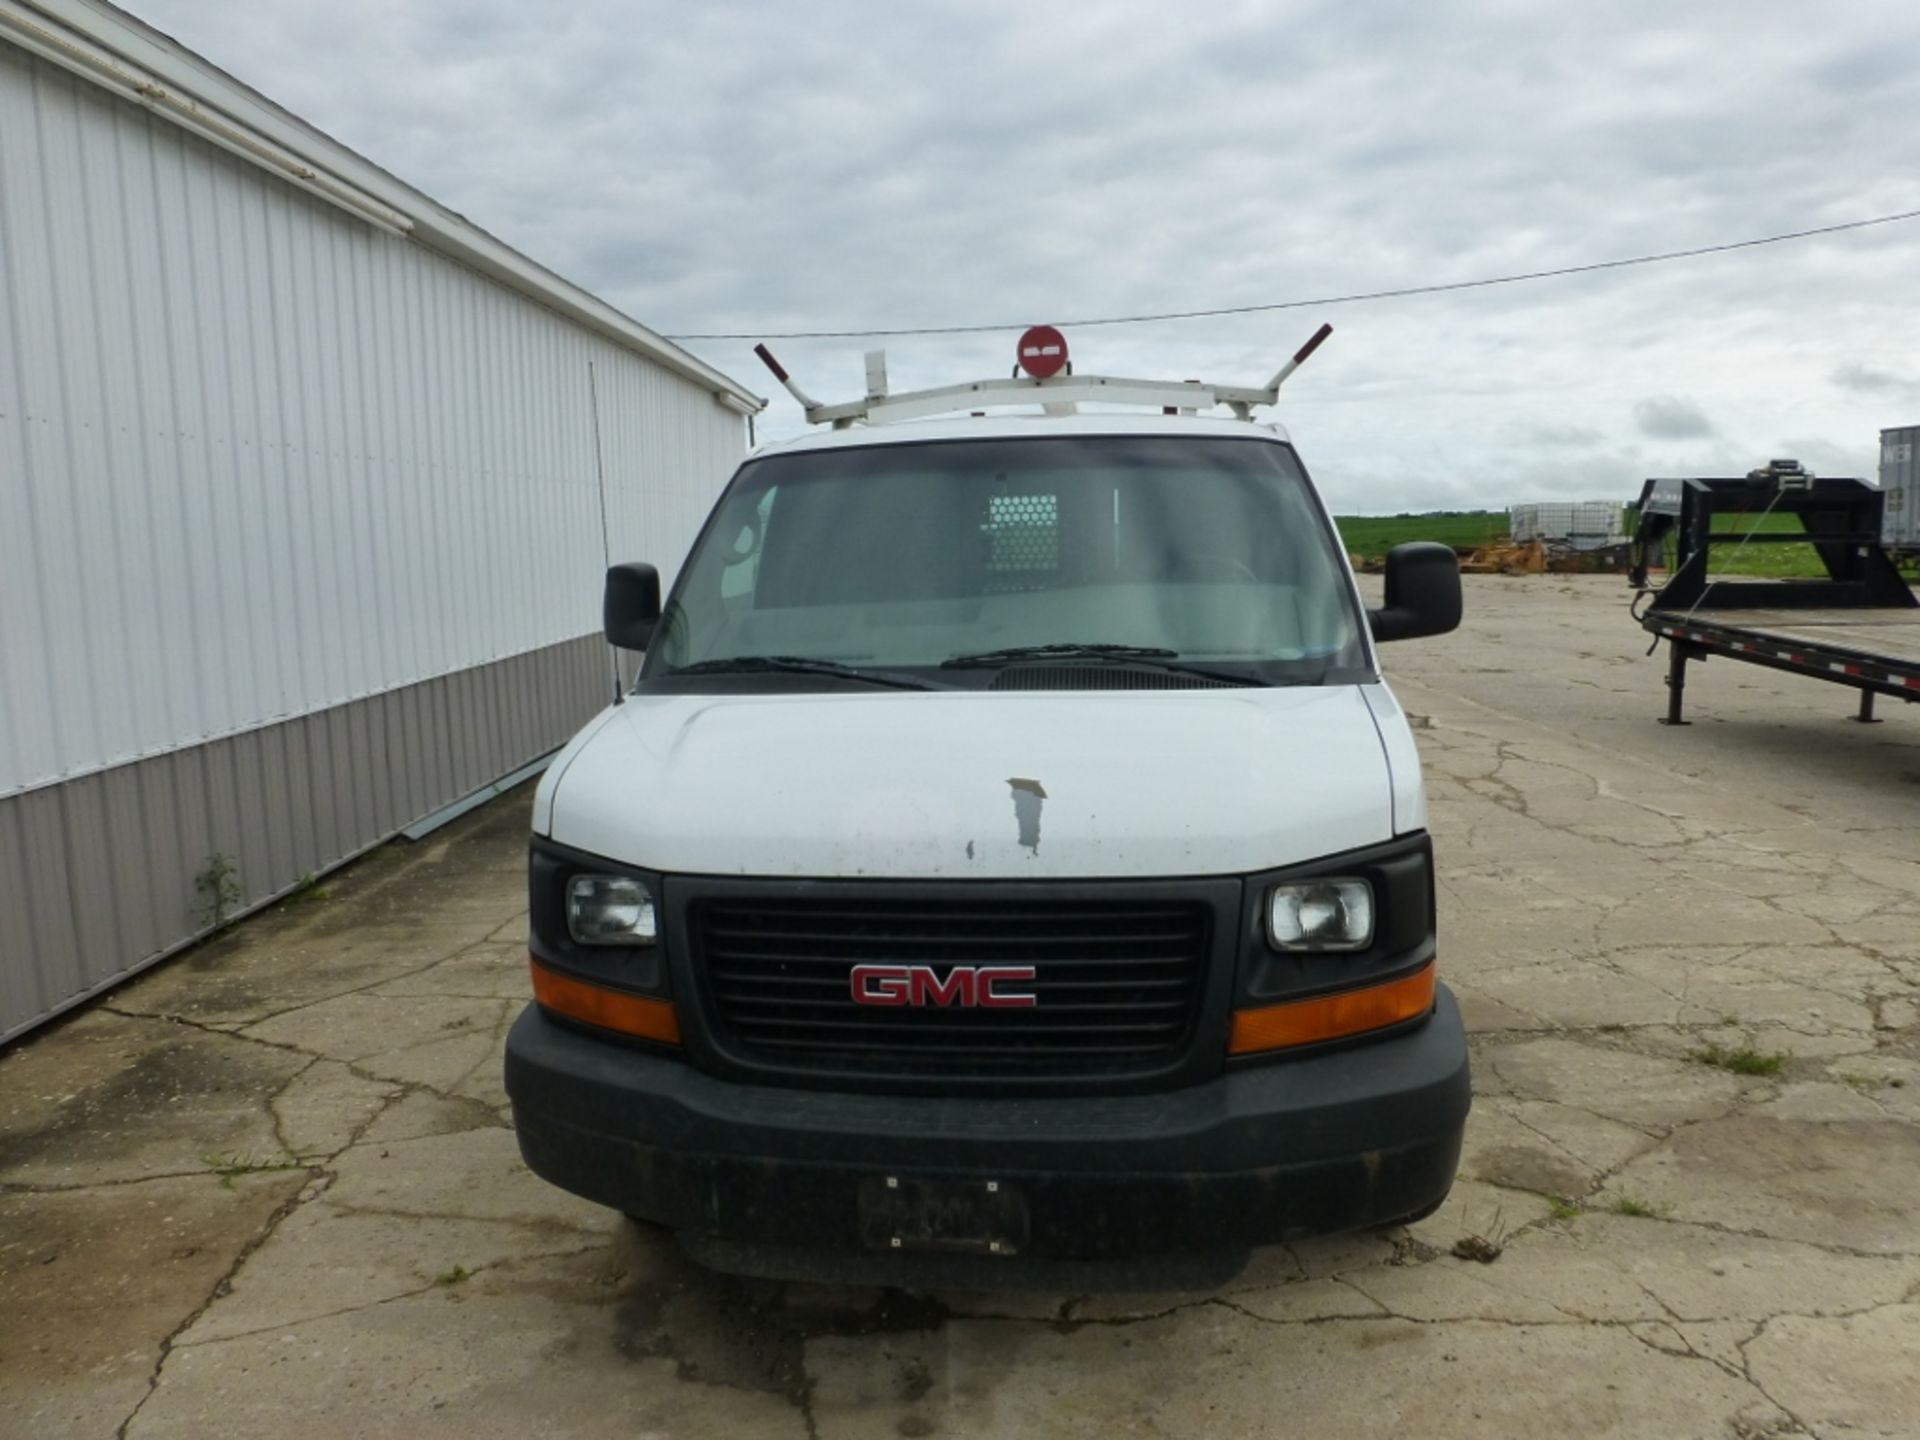 2008 GMC Cargo van, with shelf drawer units, automatic, a.c., manual windows, 254,605 unverified - Image 12 of 22